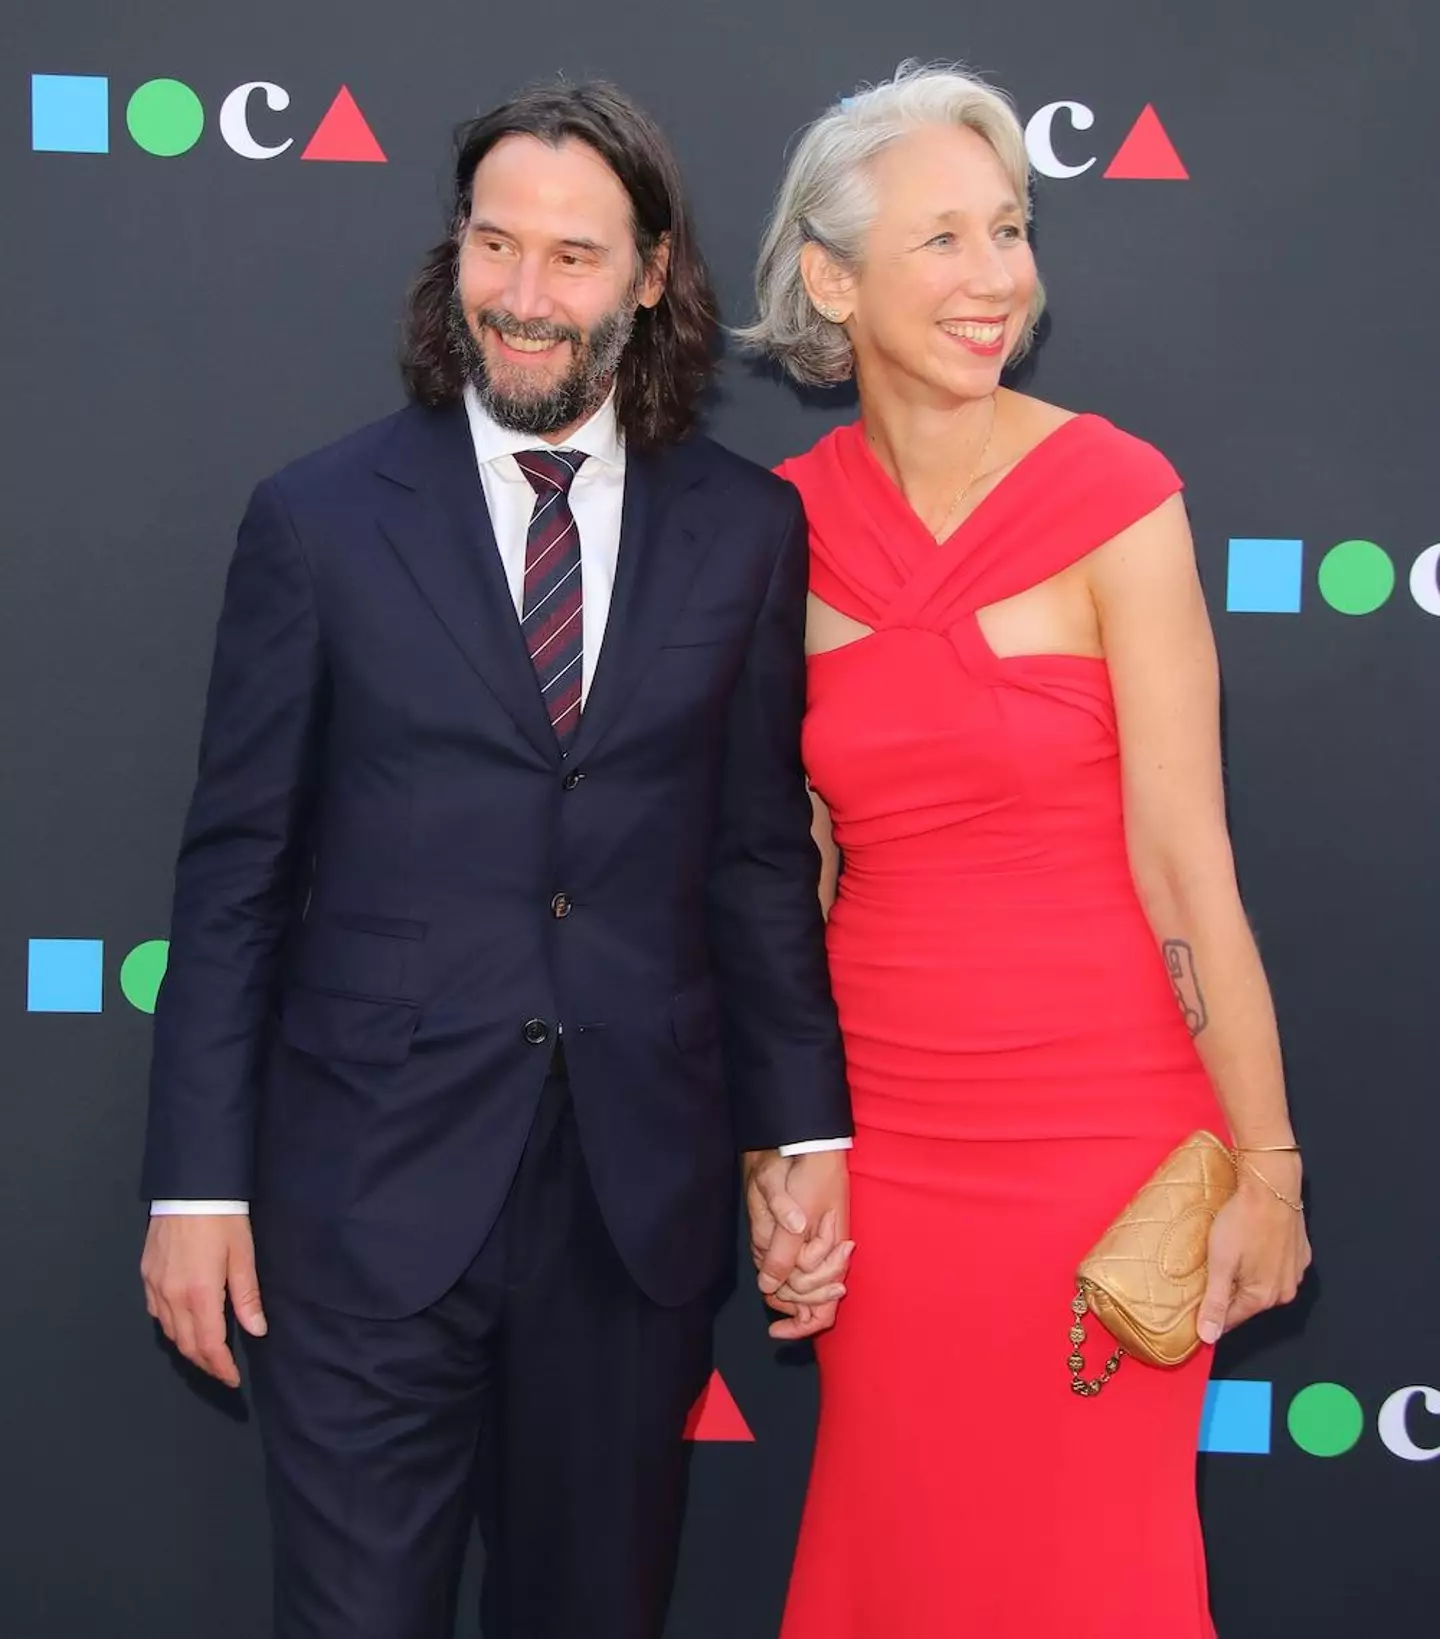 Keanu Reeves and Alexandra Grant have been dating for several years.